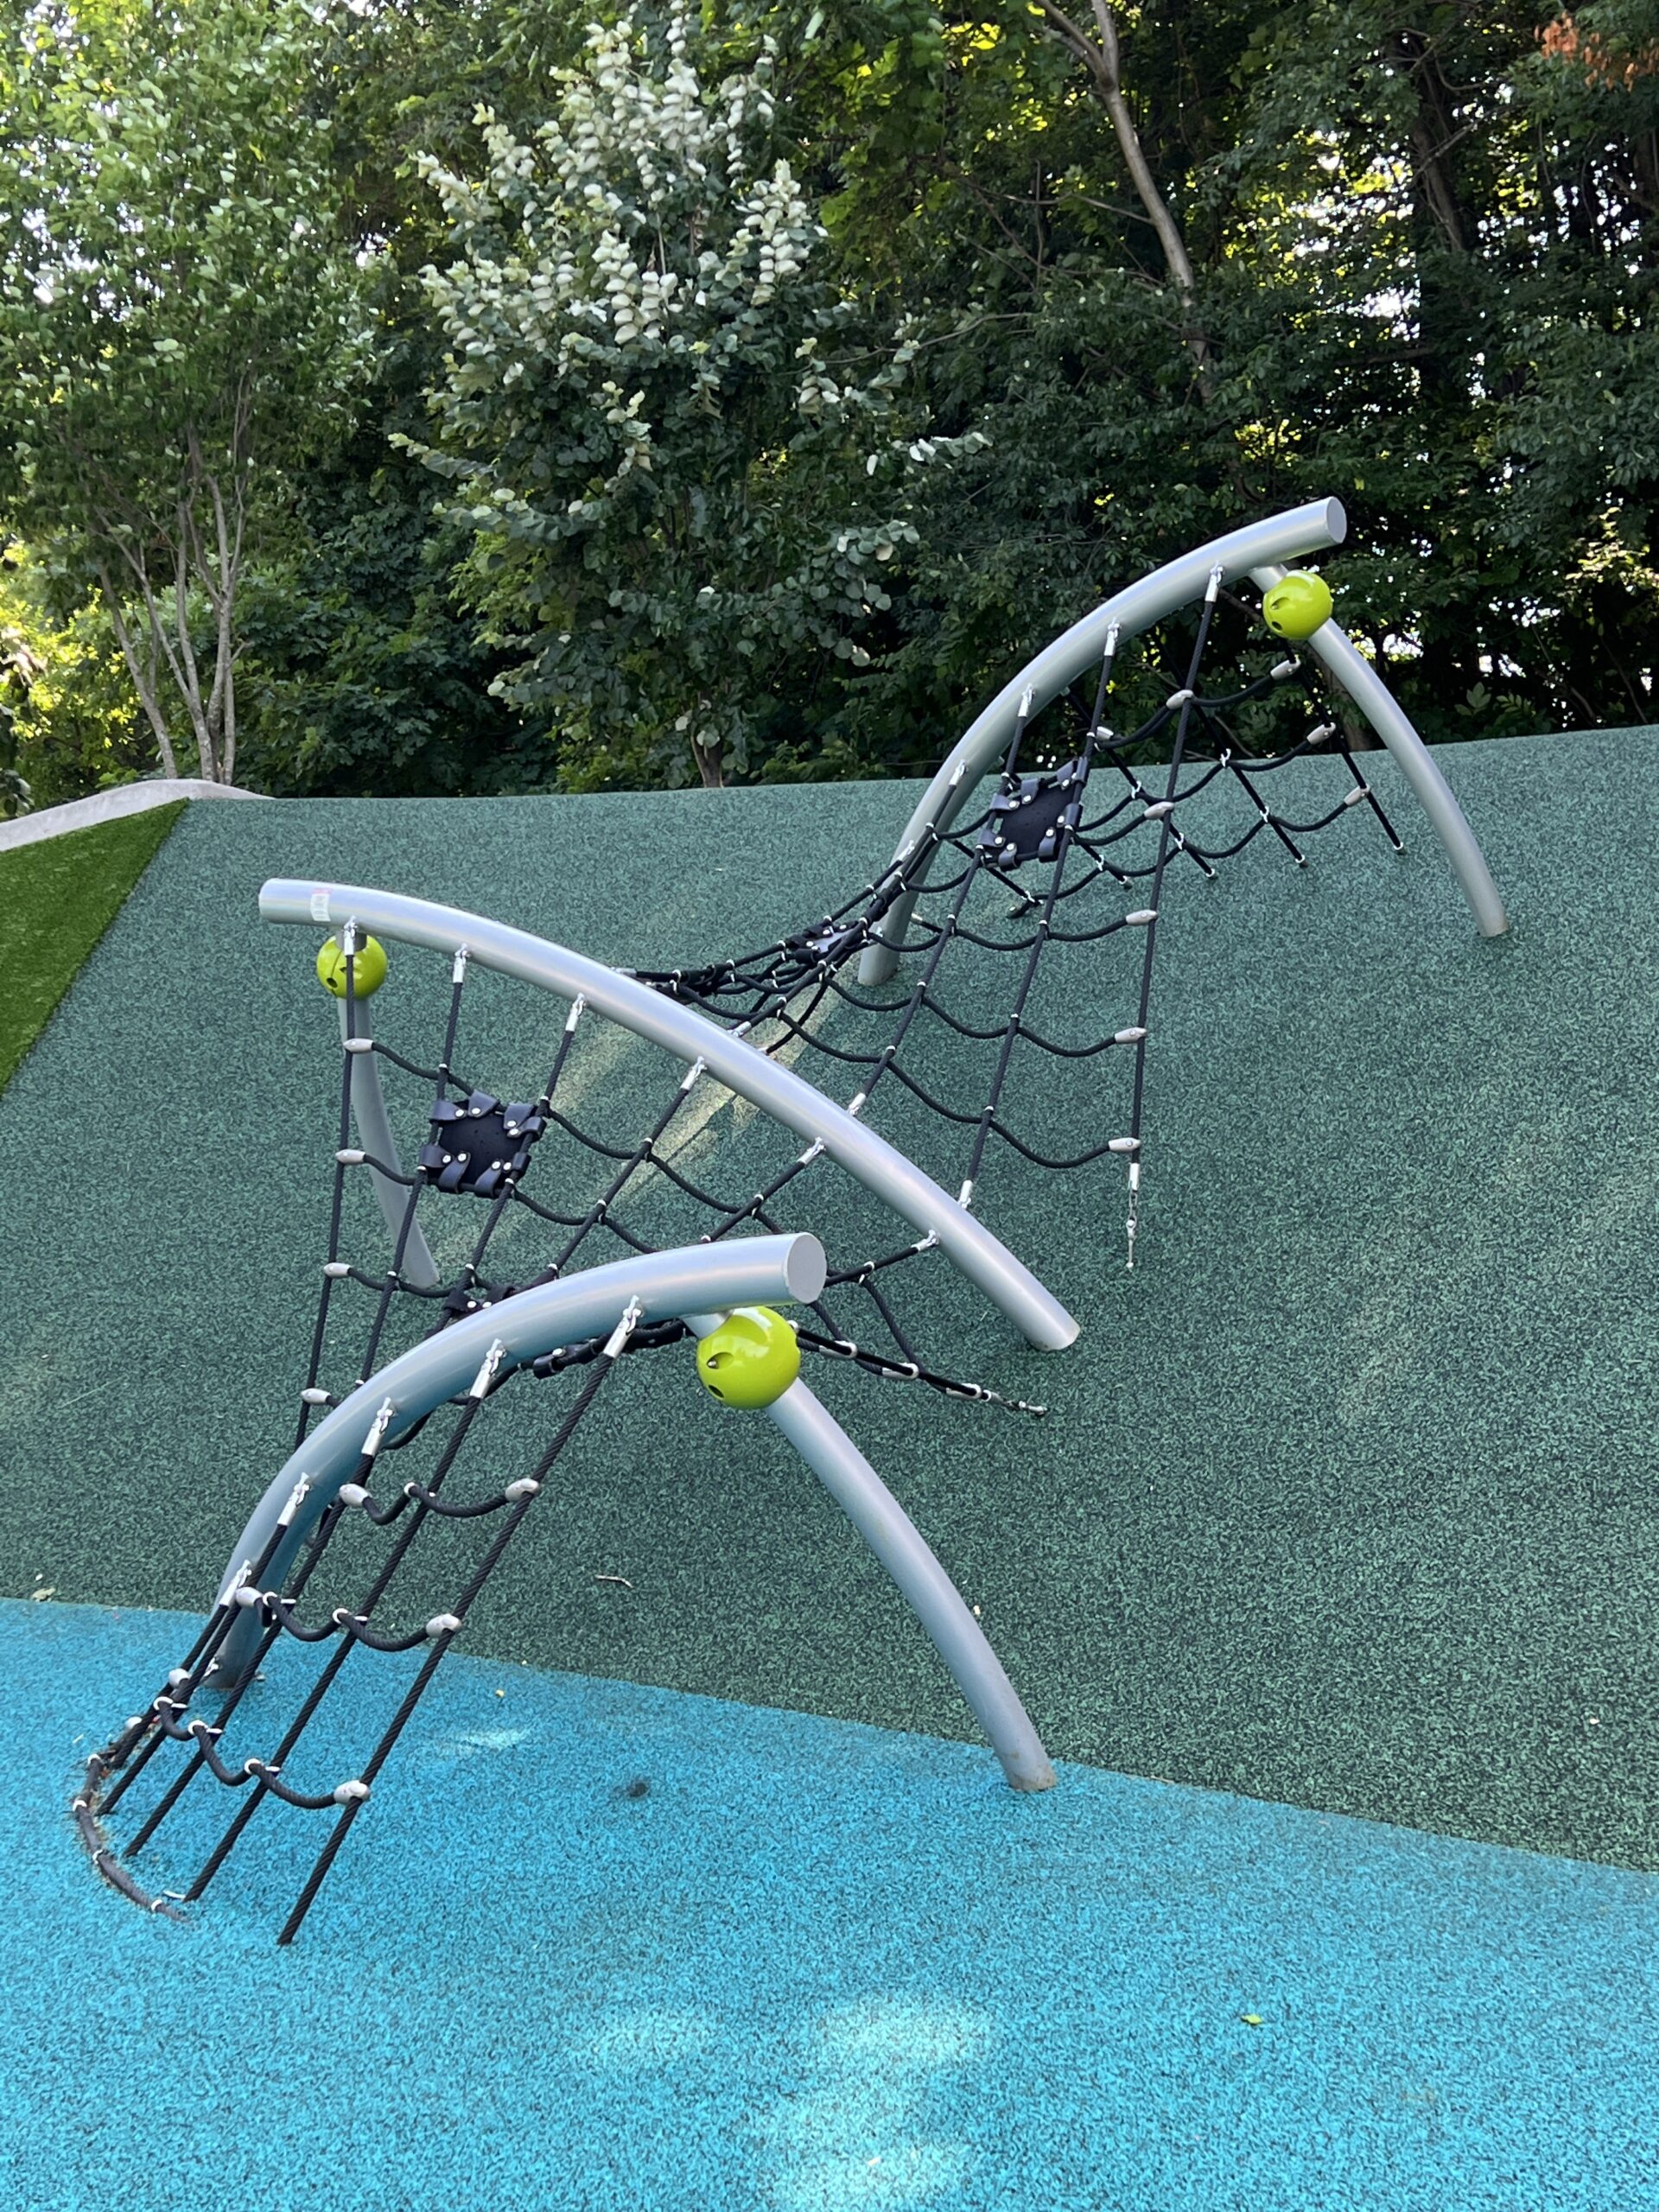 Verona Park Playground in Verona NJ - Features - Hill Wall twisting climbing net TALL image